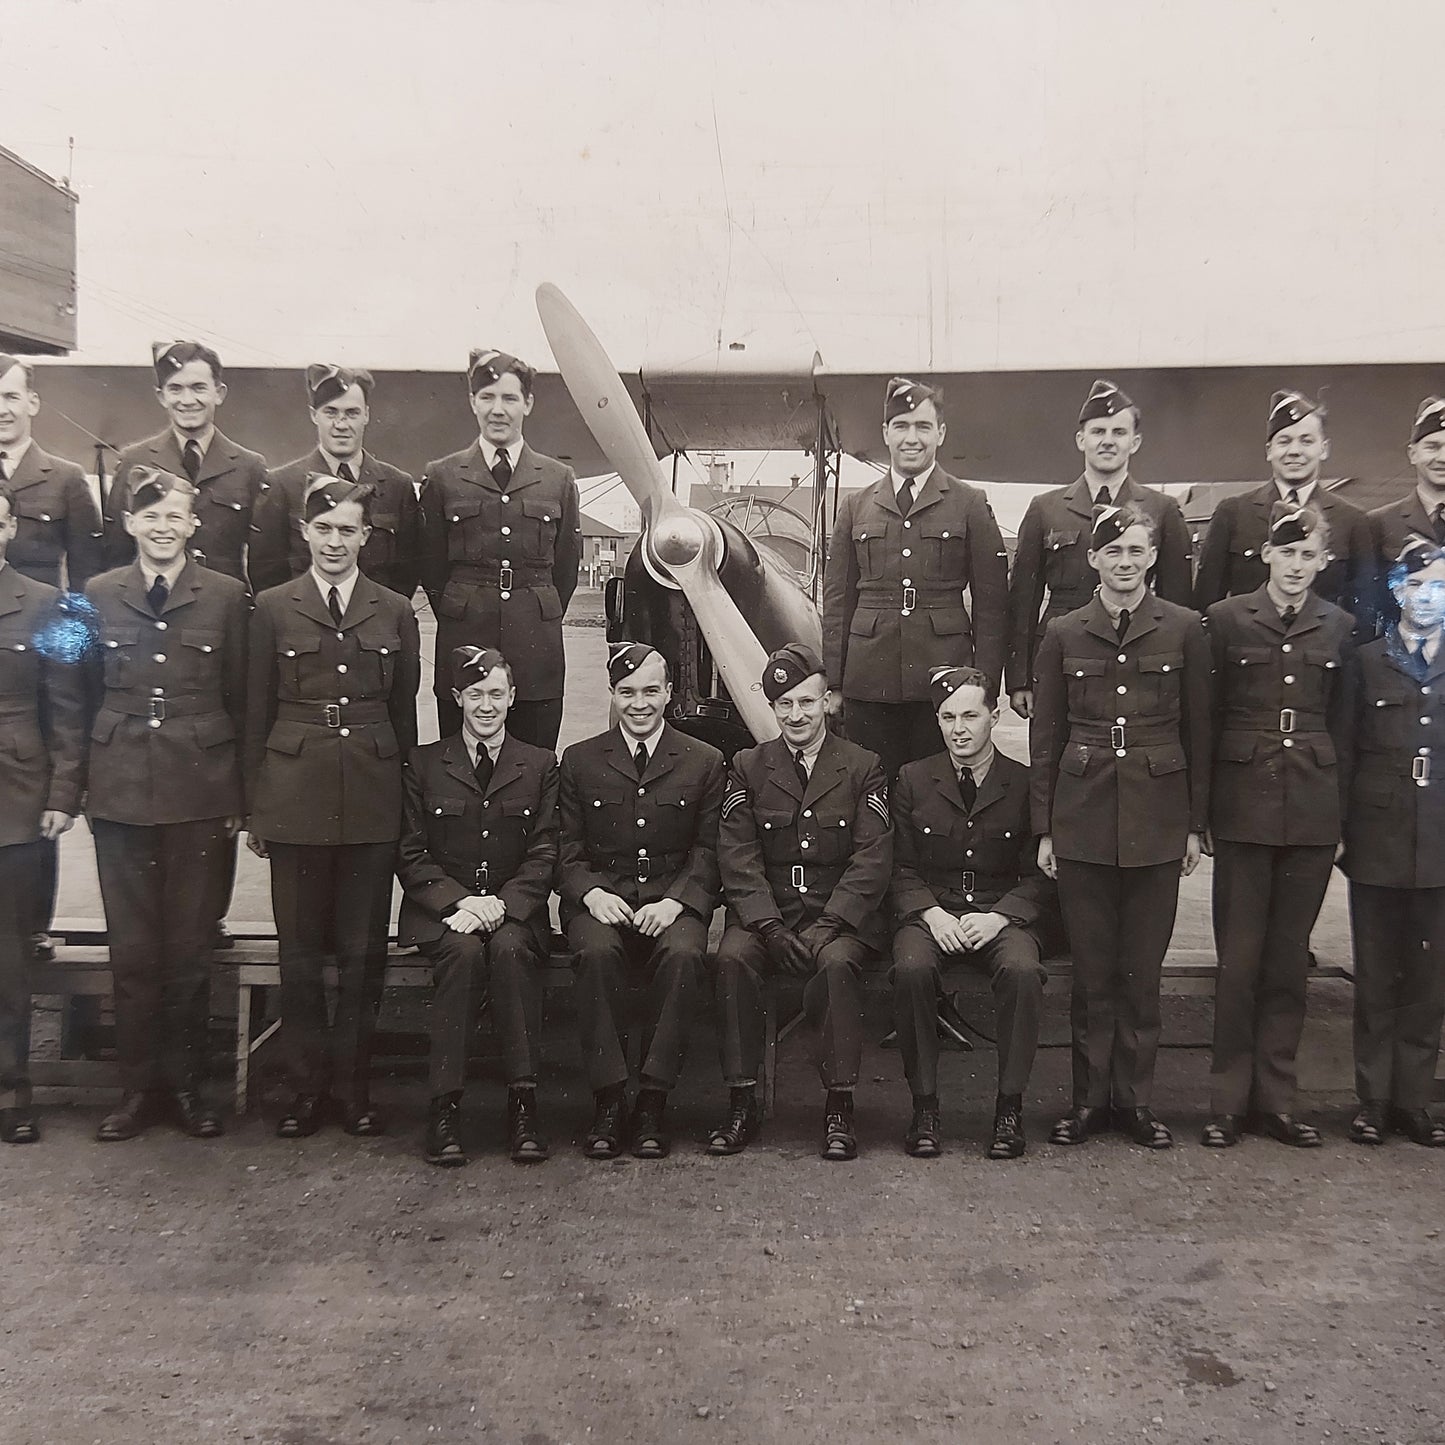 WW2 RCAF Royal Canadian Air Force Training Squadron Photo On Matte Board